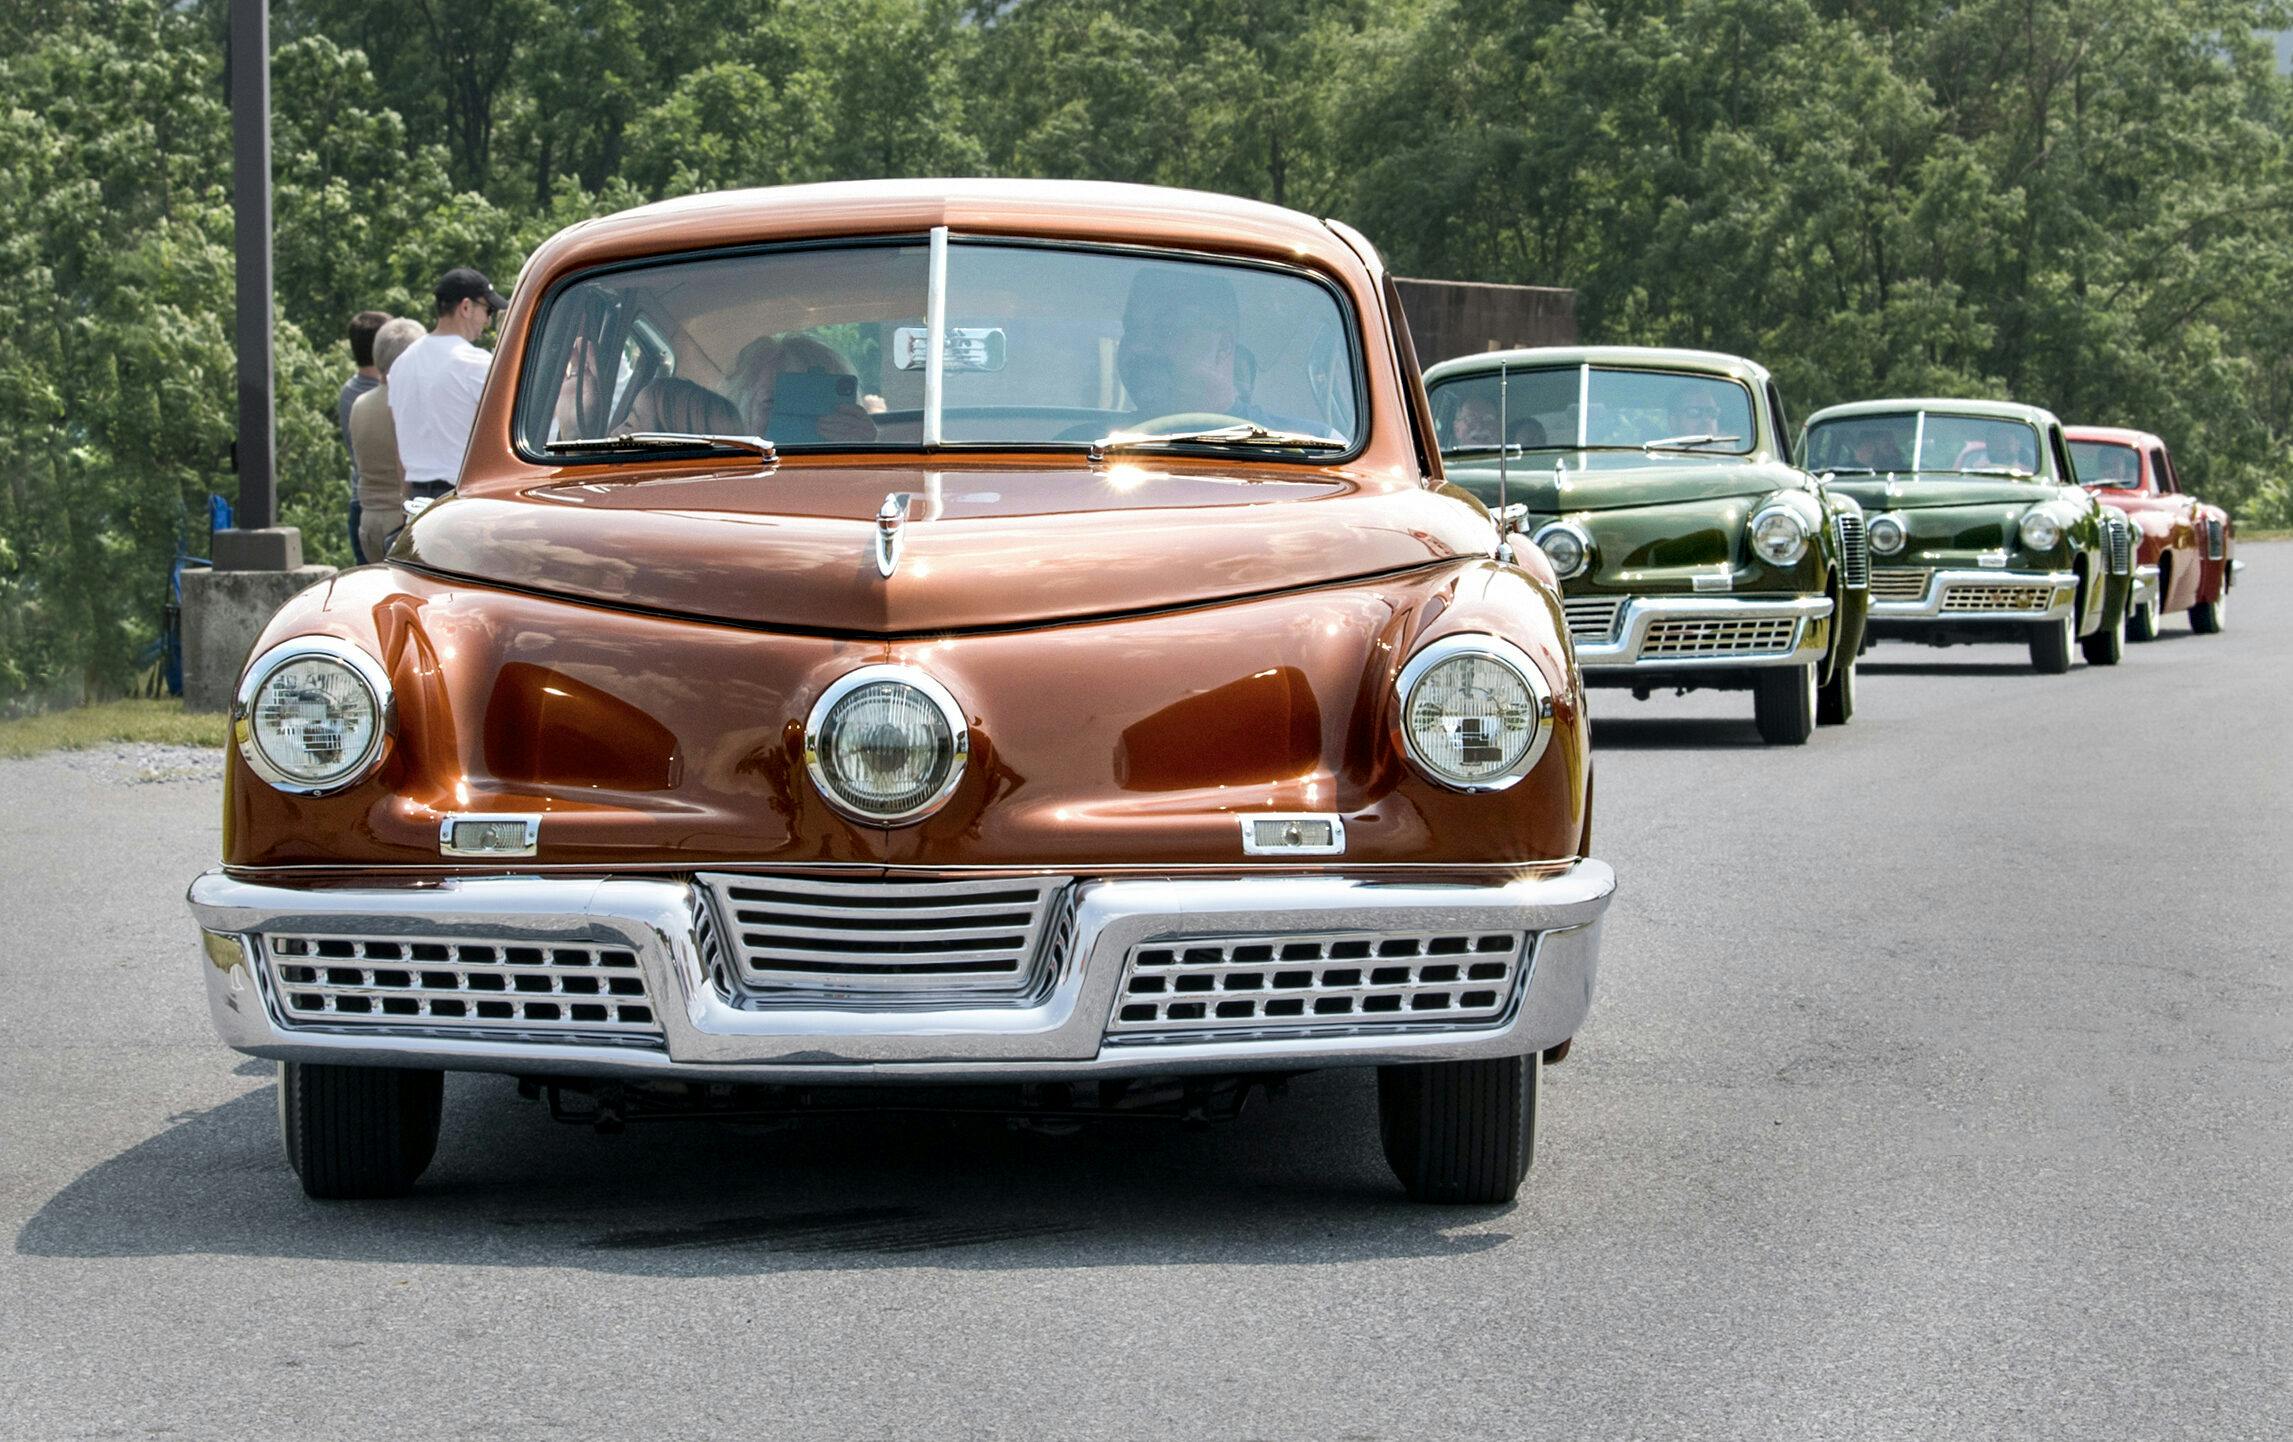 Intricacies of the Tucker story 75 years later - Old Cars Weekly